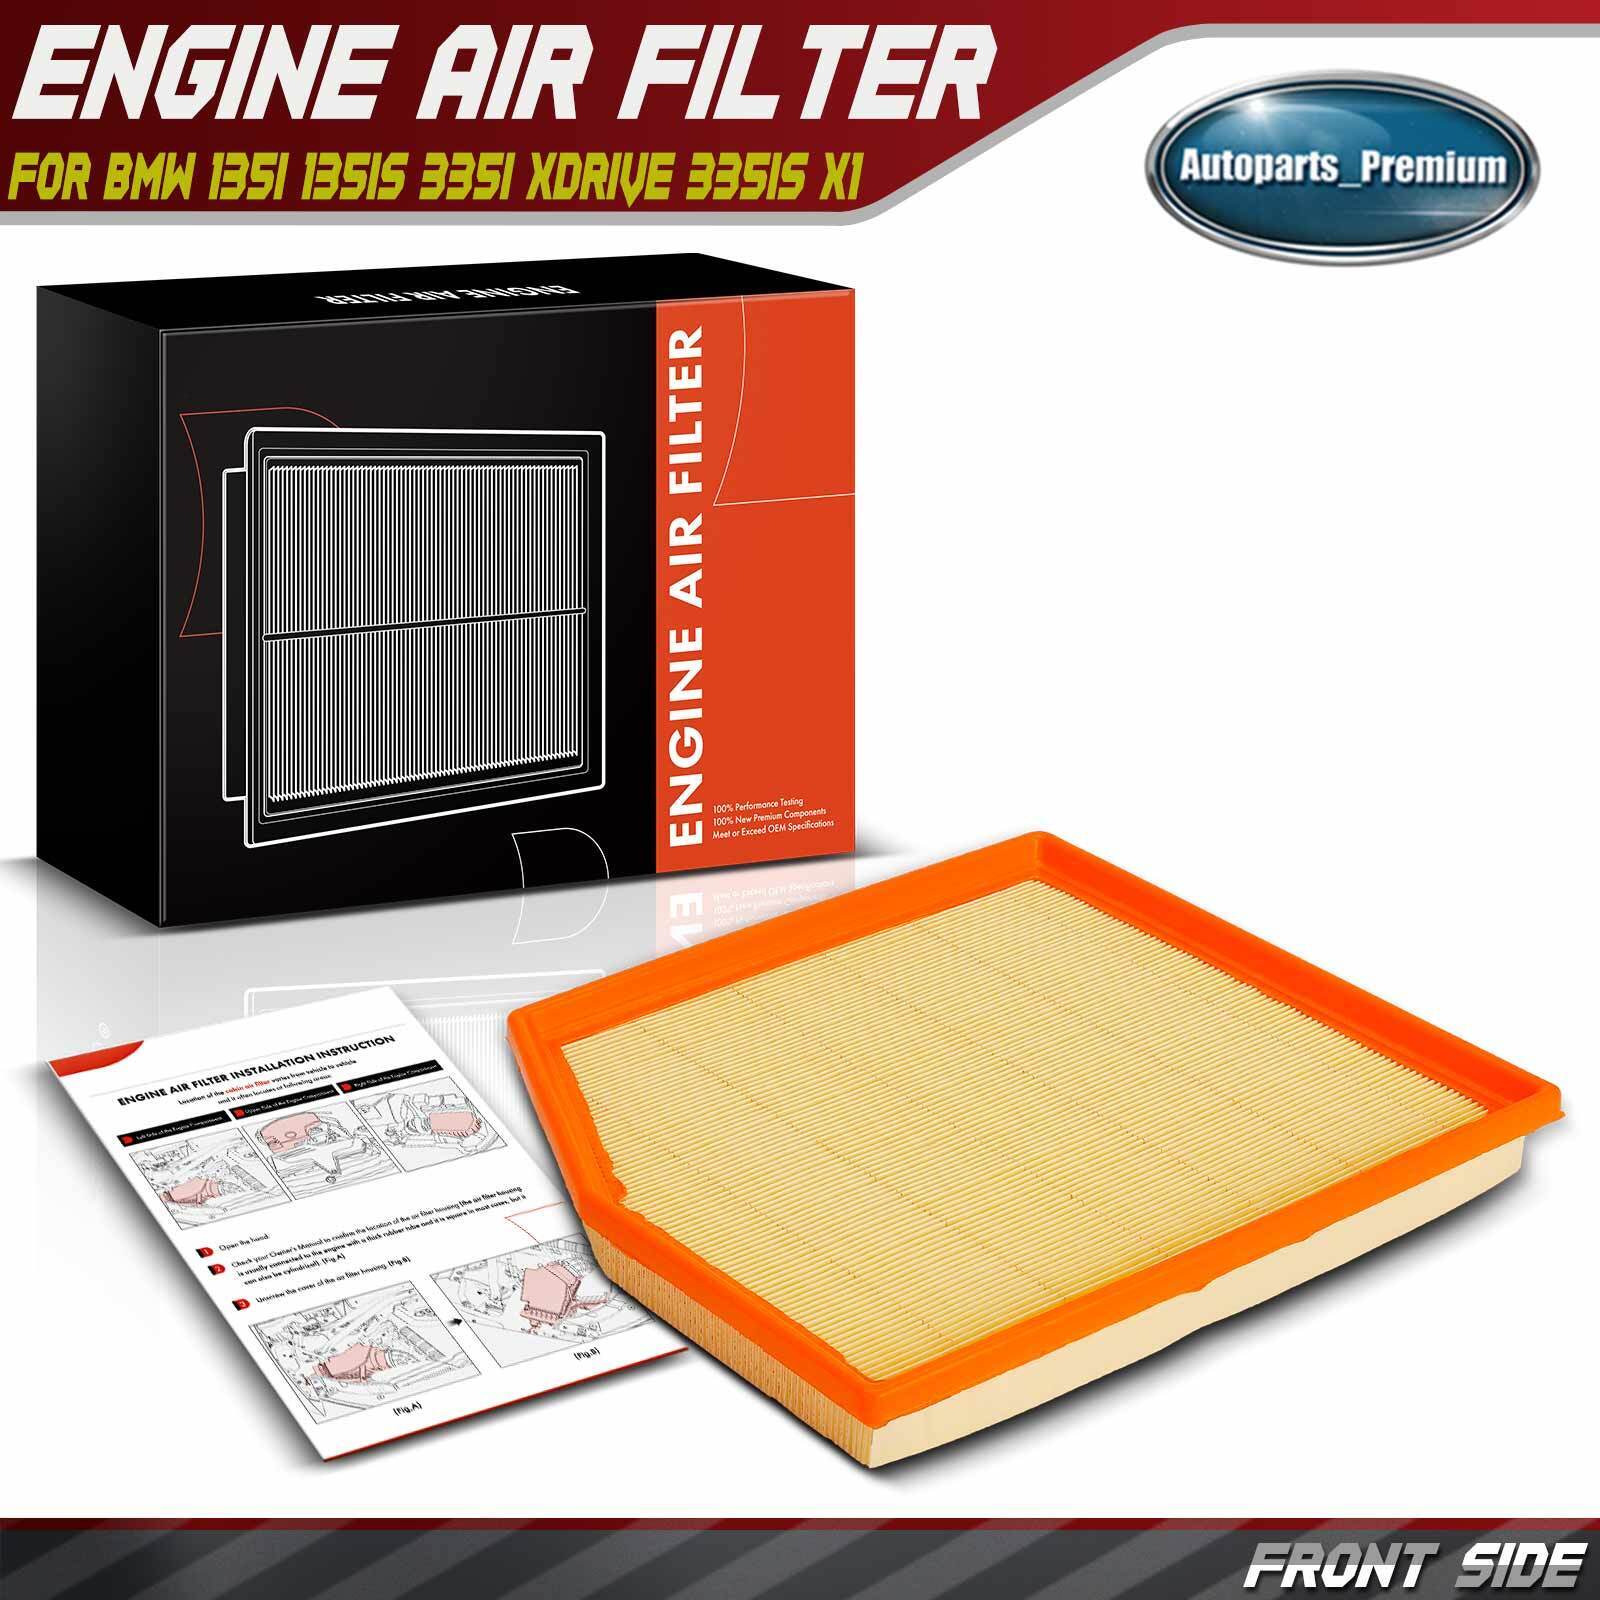 Engine Air Filter for BMW E82 E90 135i 135is 335I 335i xDrive 335is X1 L6 3.0L